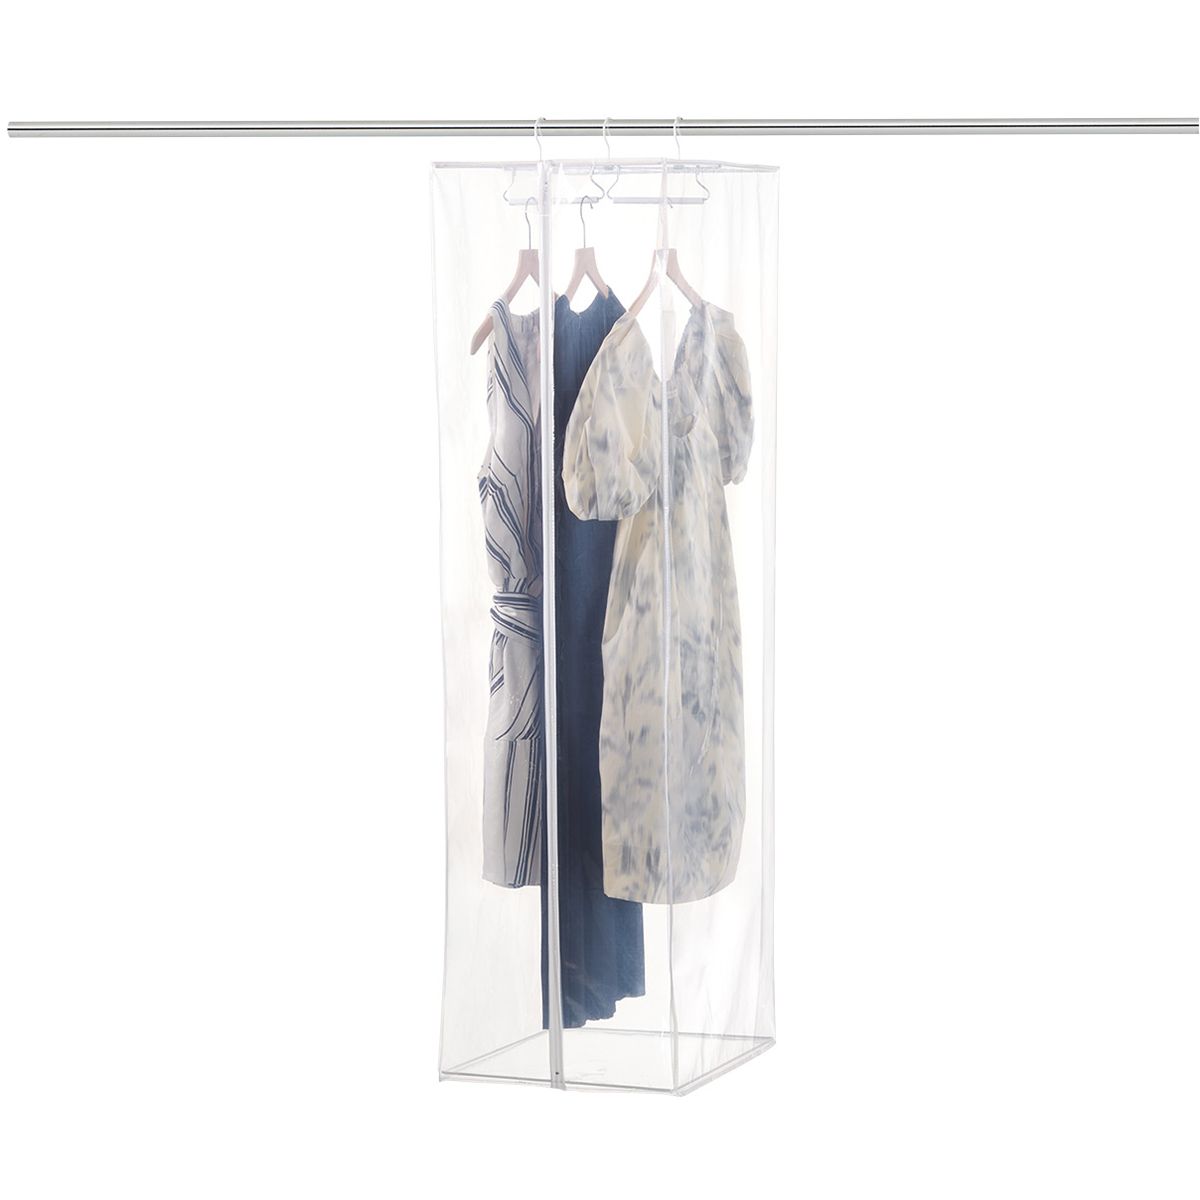 PEVA Hanging Dress Bag Clear | The Container Store